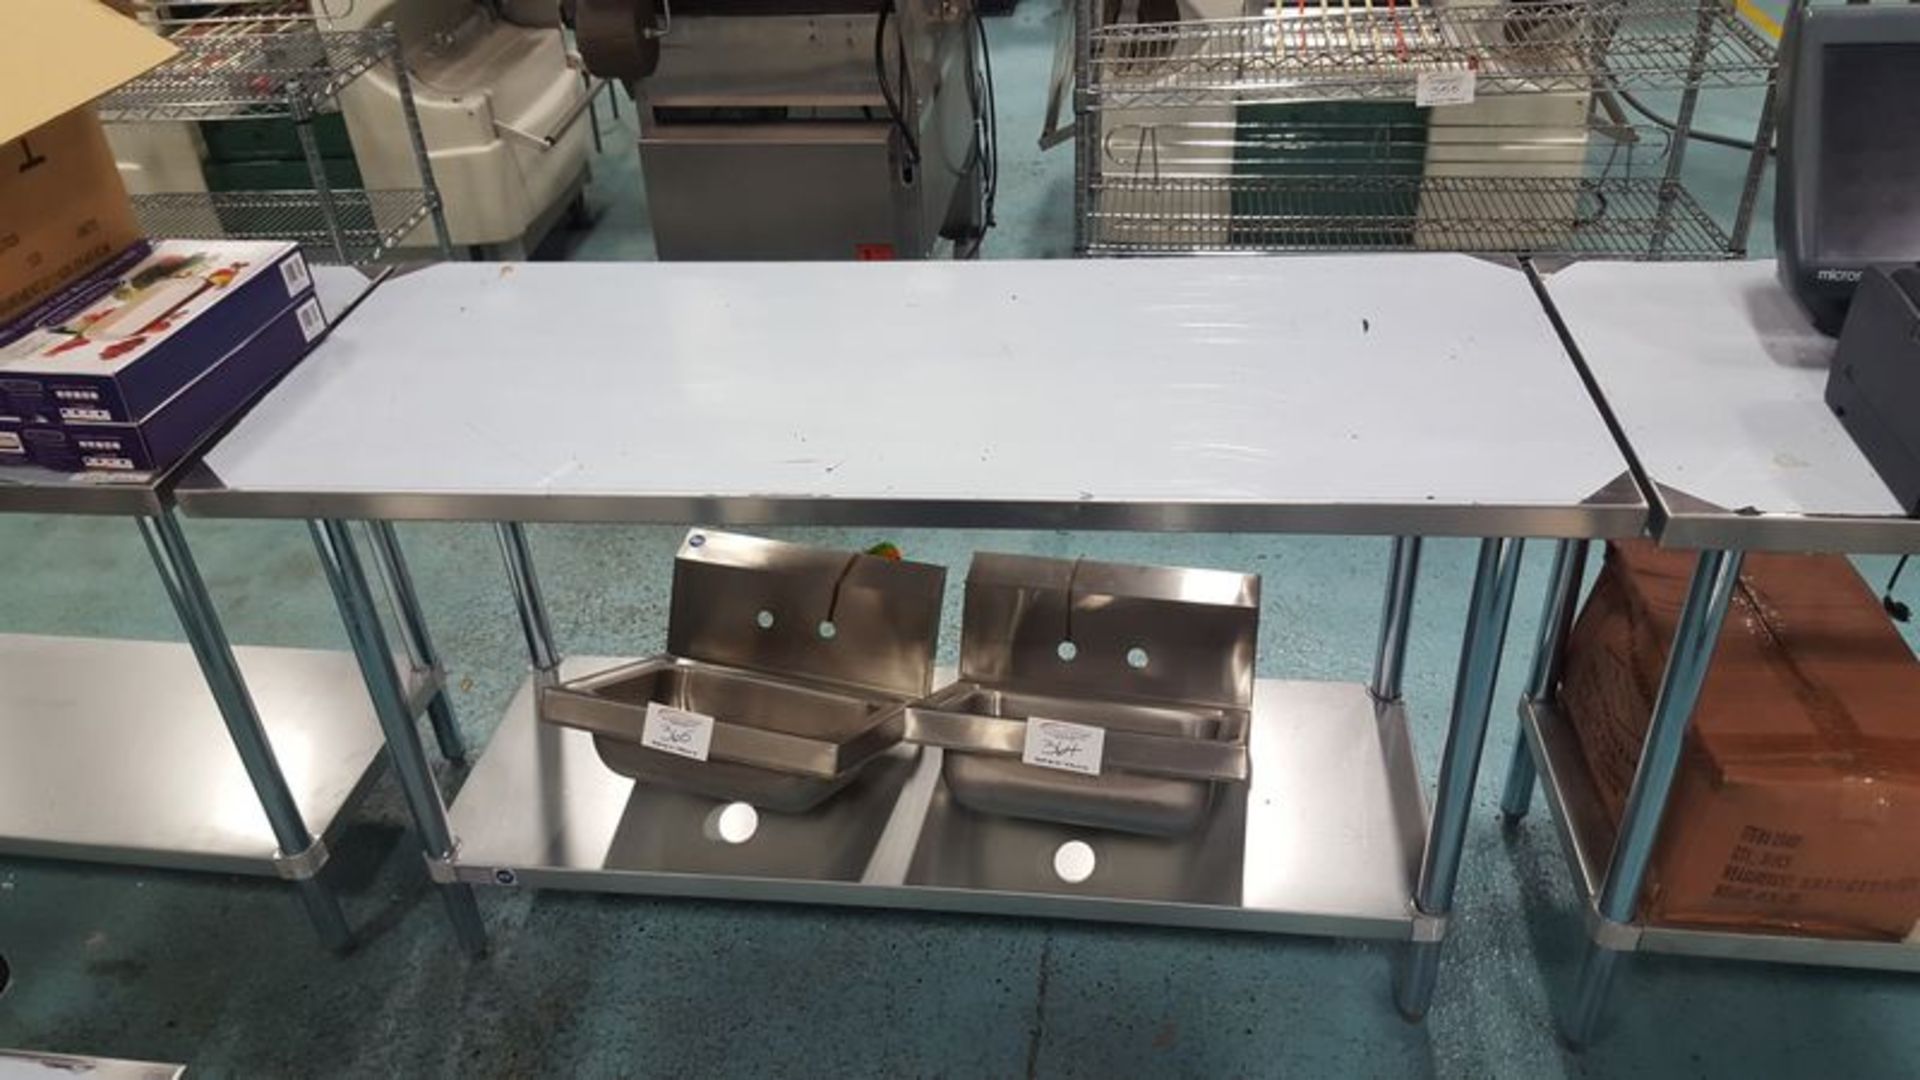 24 x 60" New 2 Tier Stainless Steel Work Table